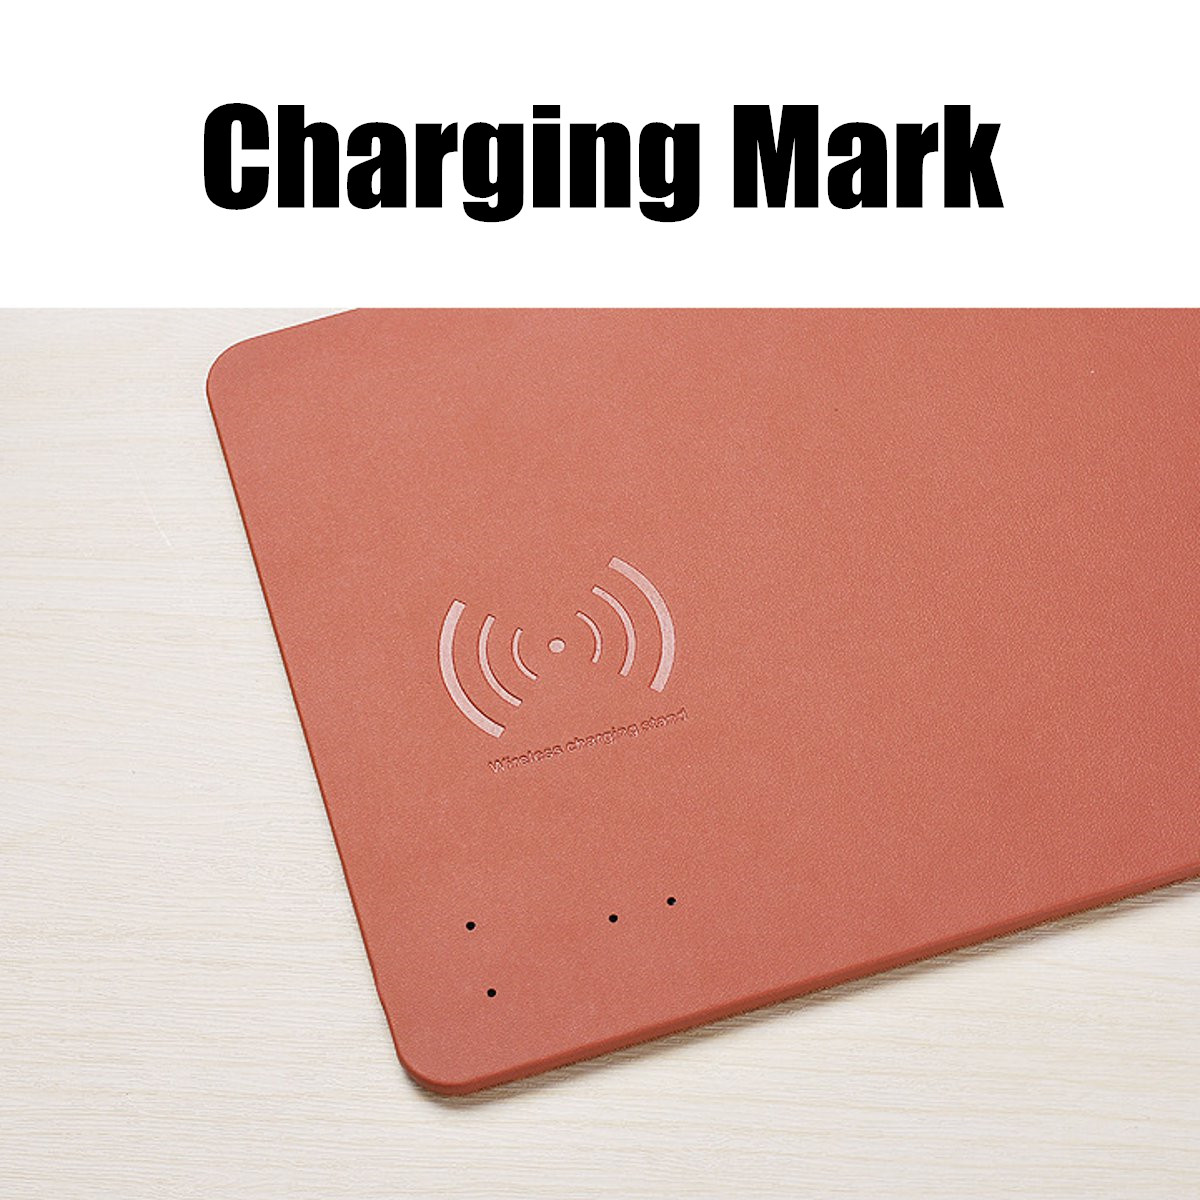 Imitation Leather Mobile Phones Wireless Fast Charger Mouse Pad Qi Wireless Charging 18